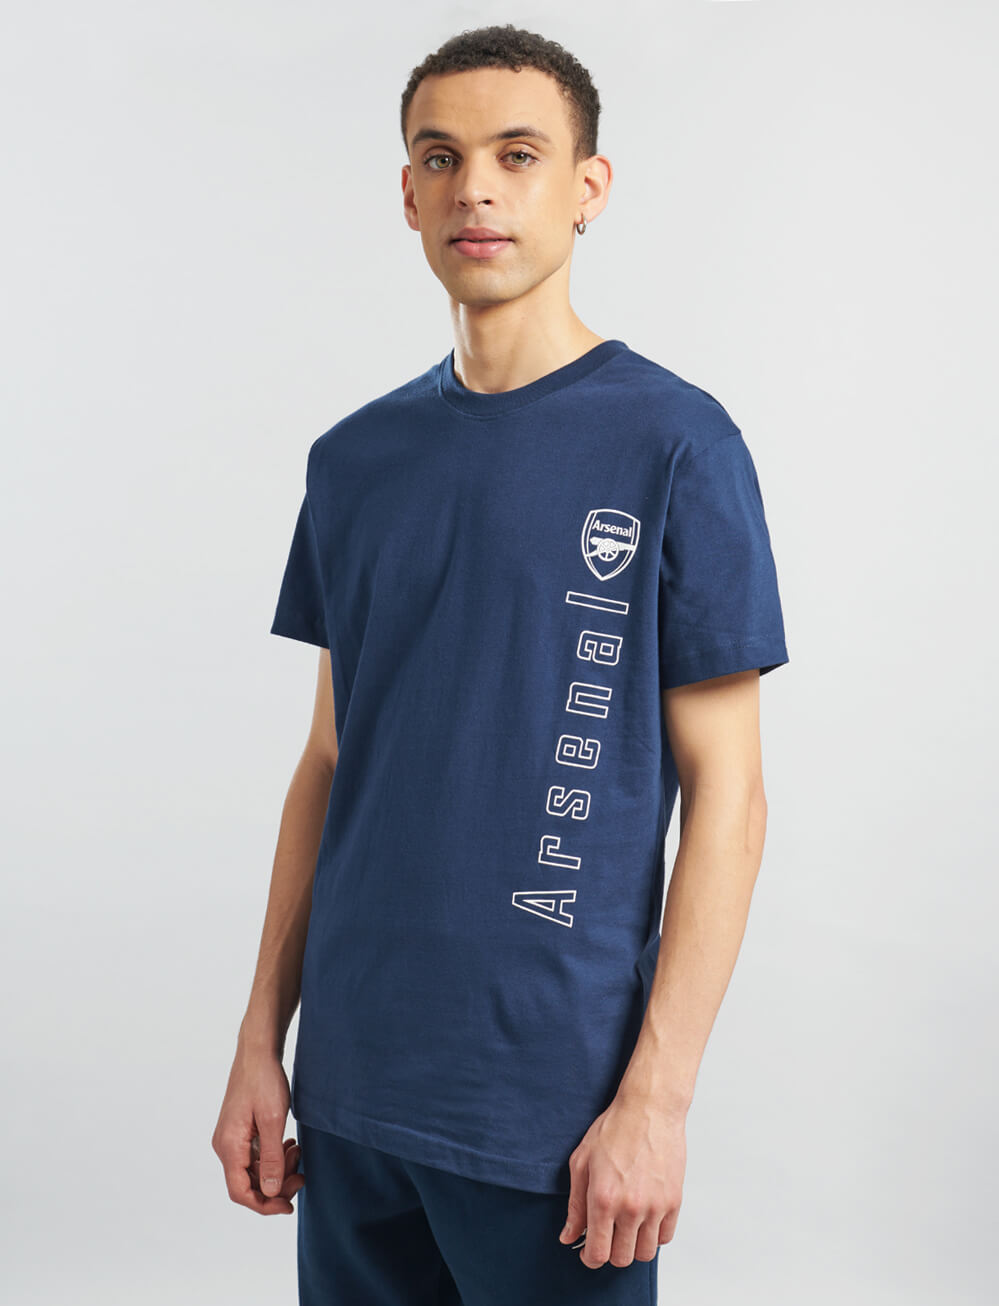 Official Arsenal Graphic T-Shirt - Navy - The World Football Store